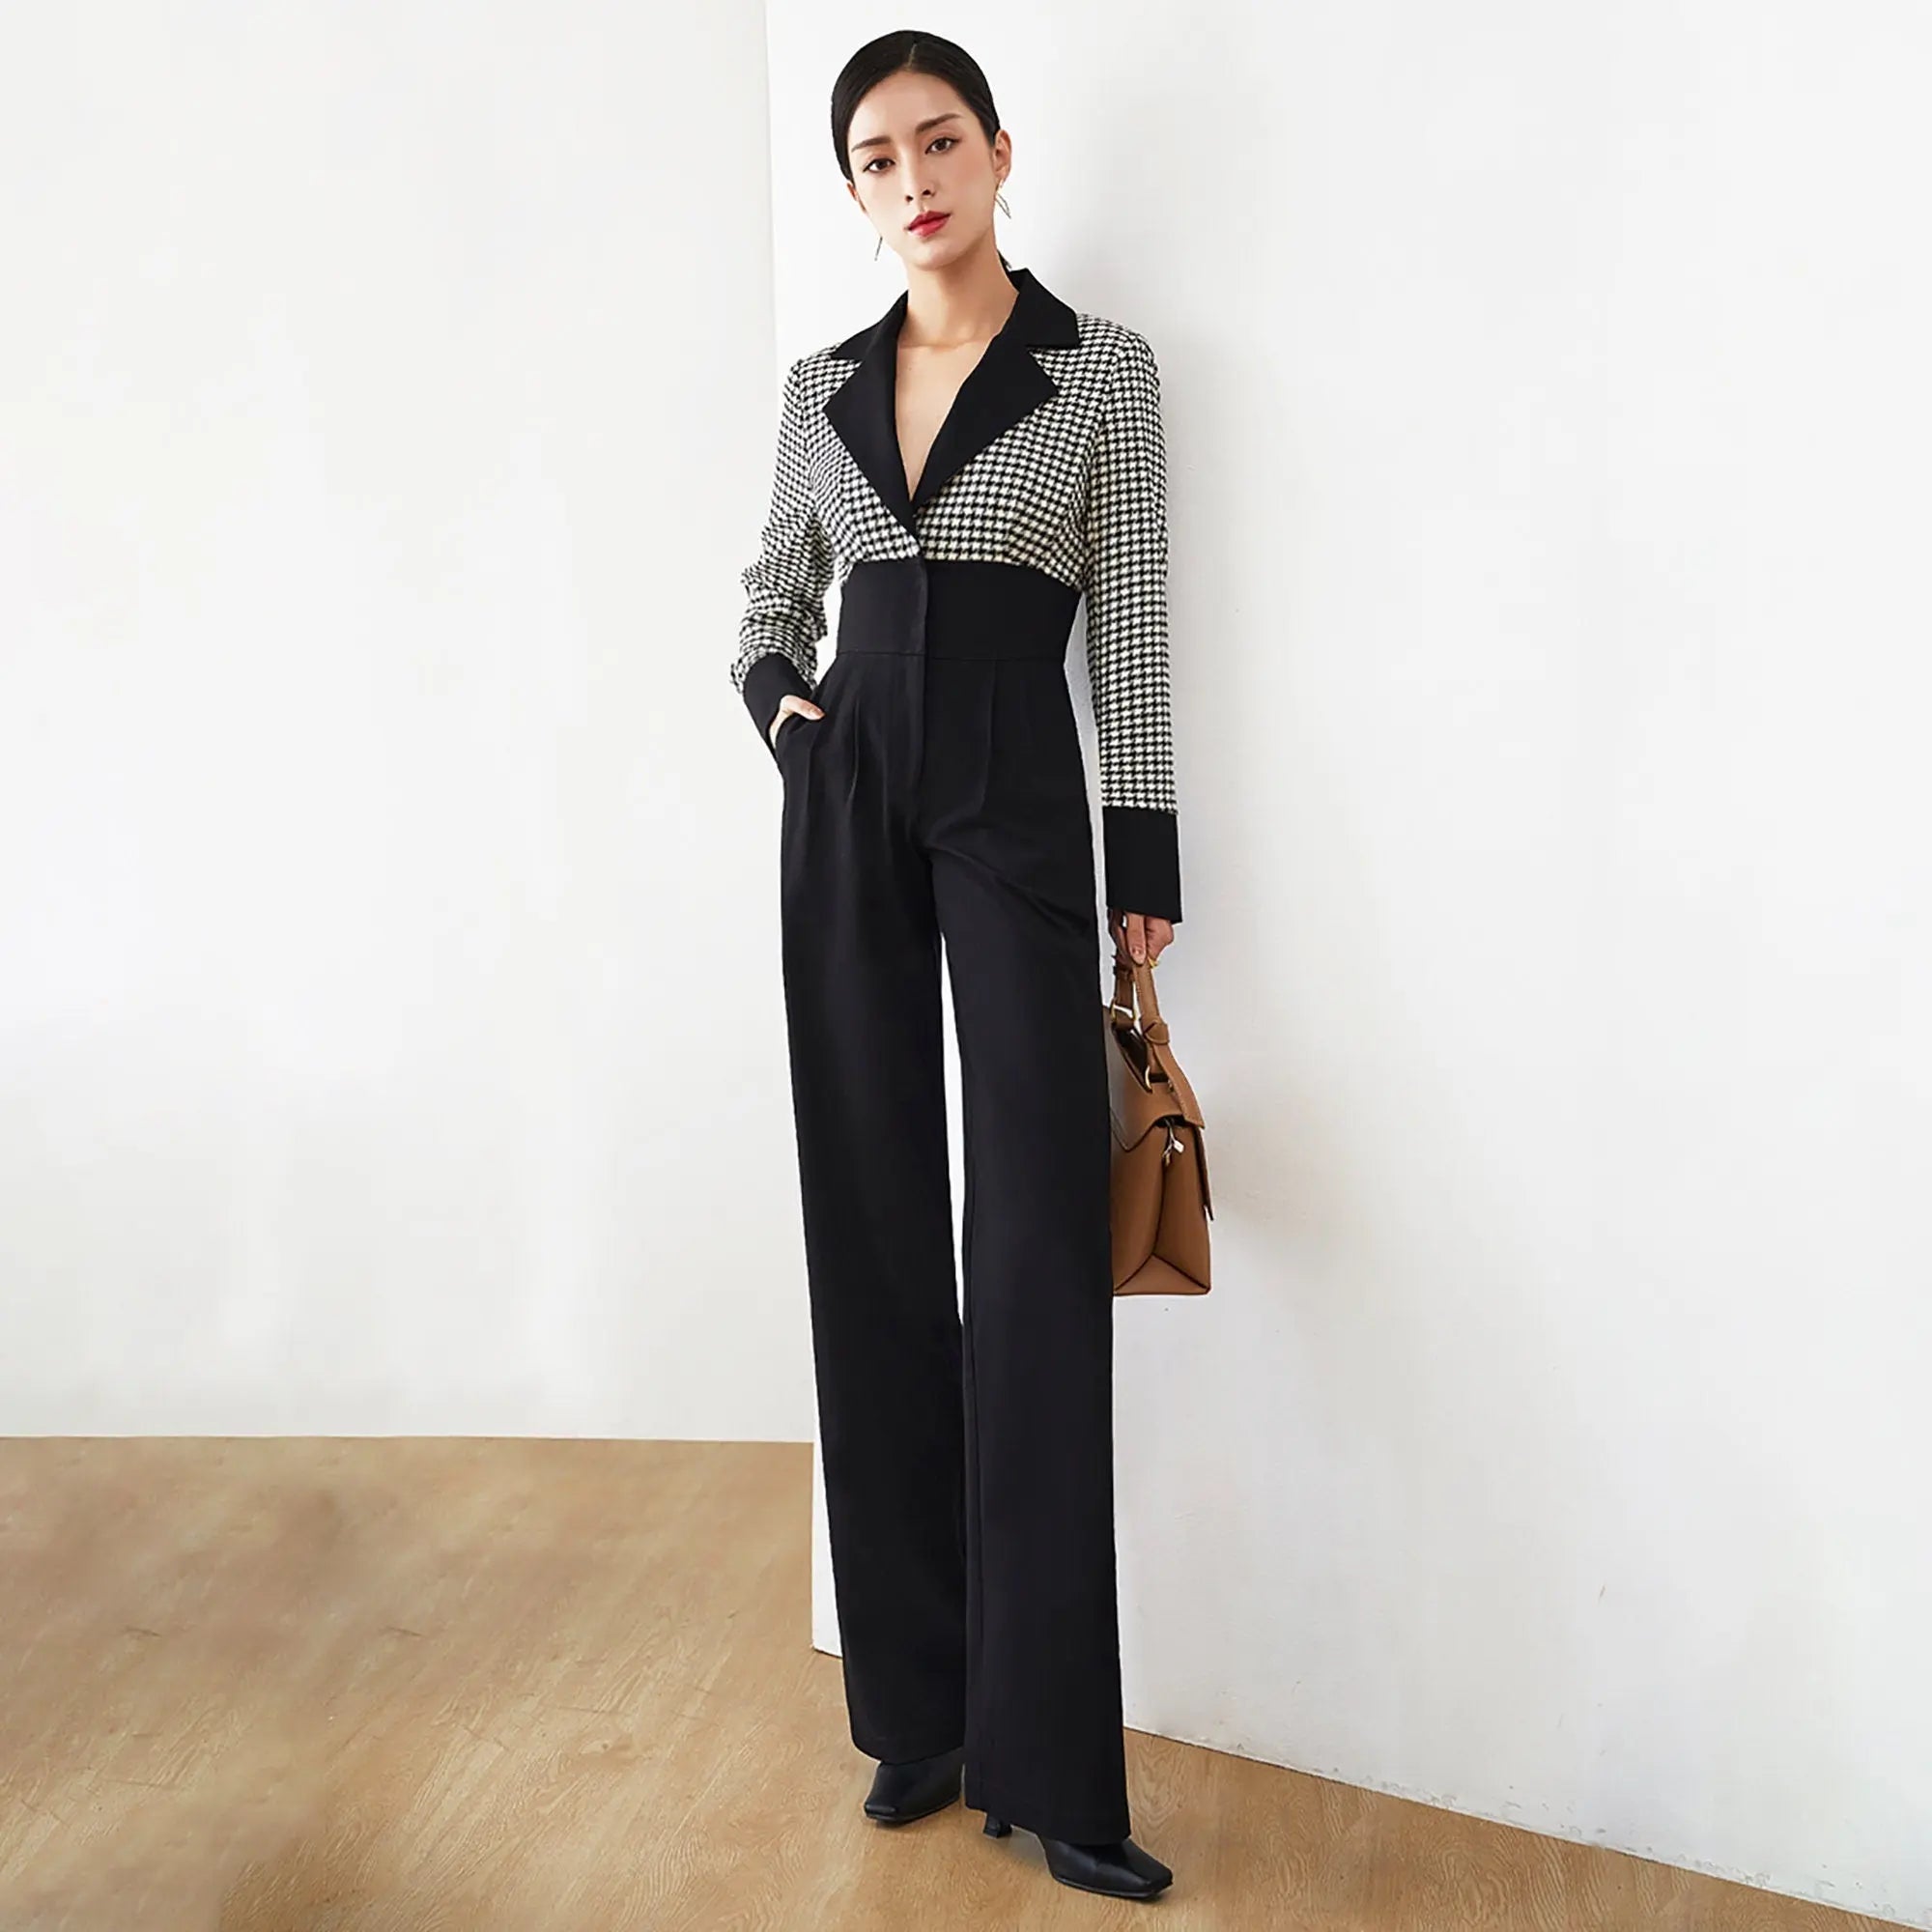 Women's Occasion Jumpsuits | Evening & Going Out Jumpsuits | Next UK